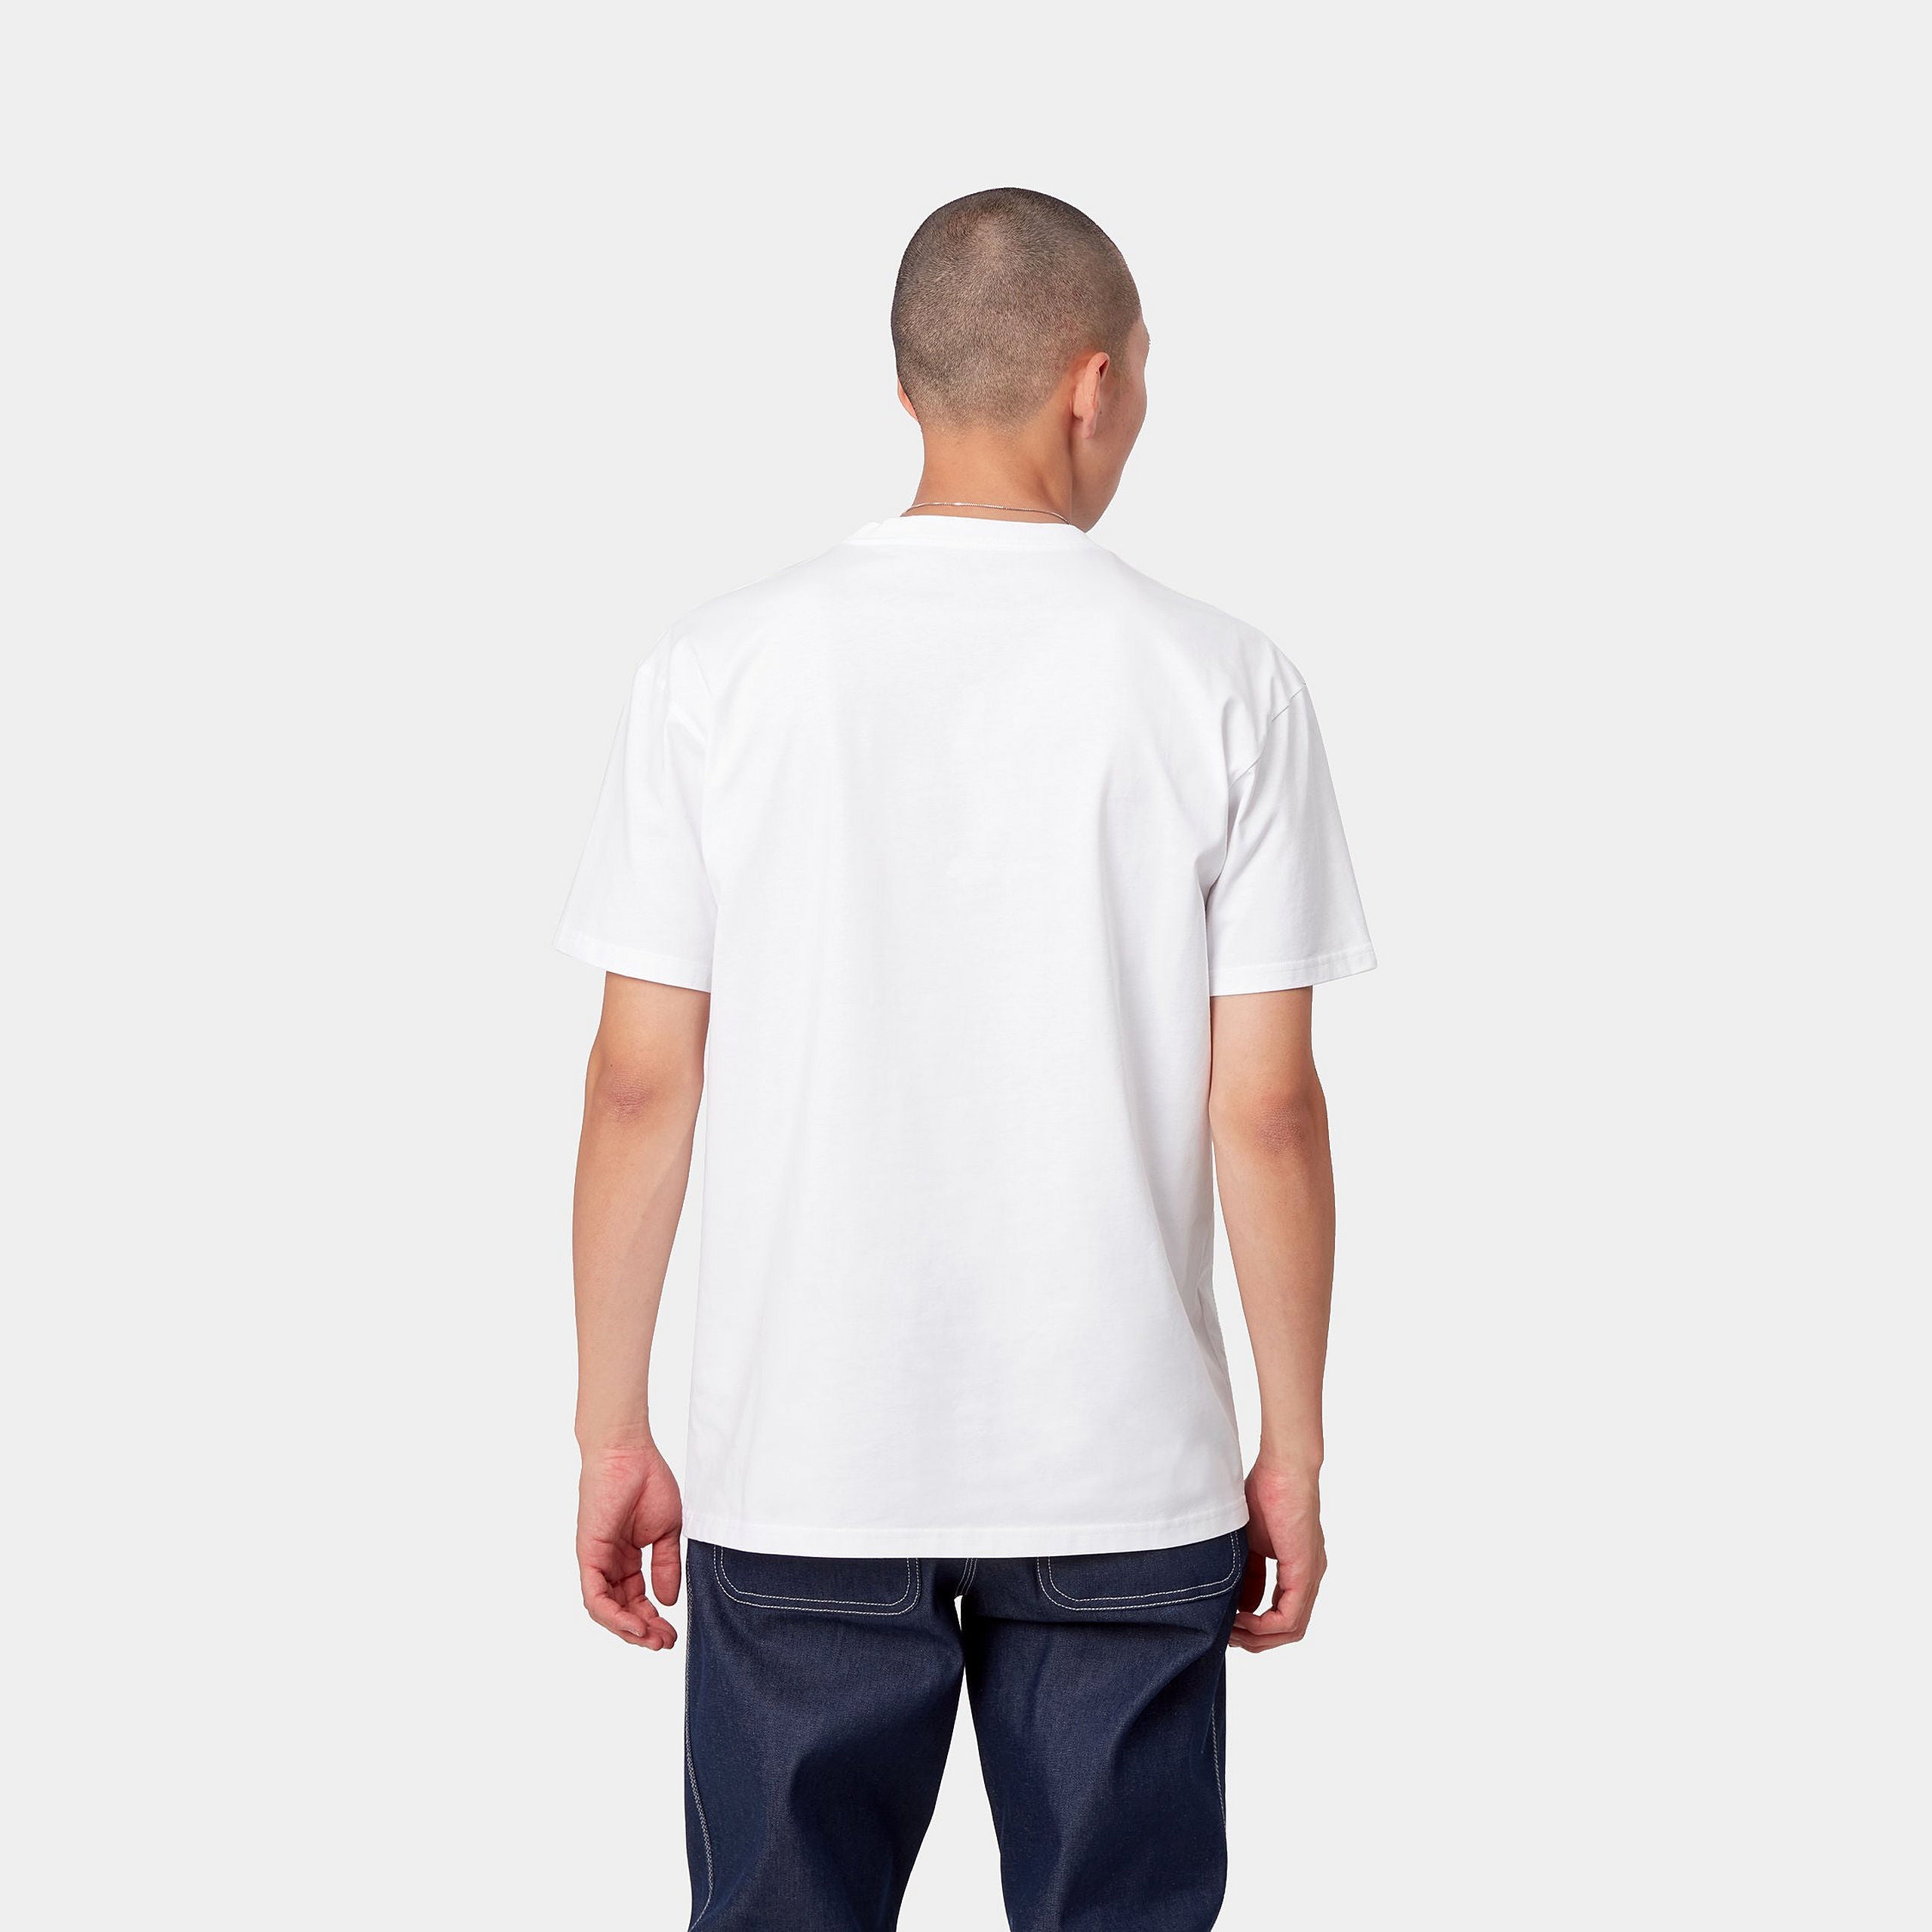 Carhartt WIP S/S Chase T-Shirt in White/Gold